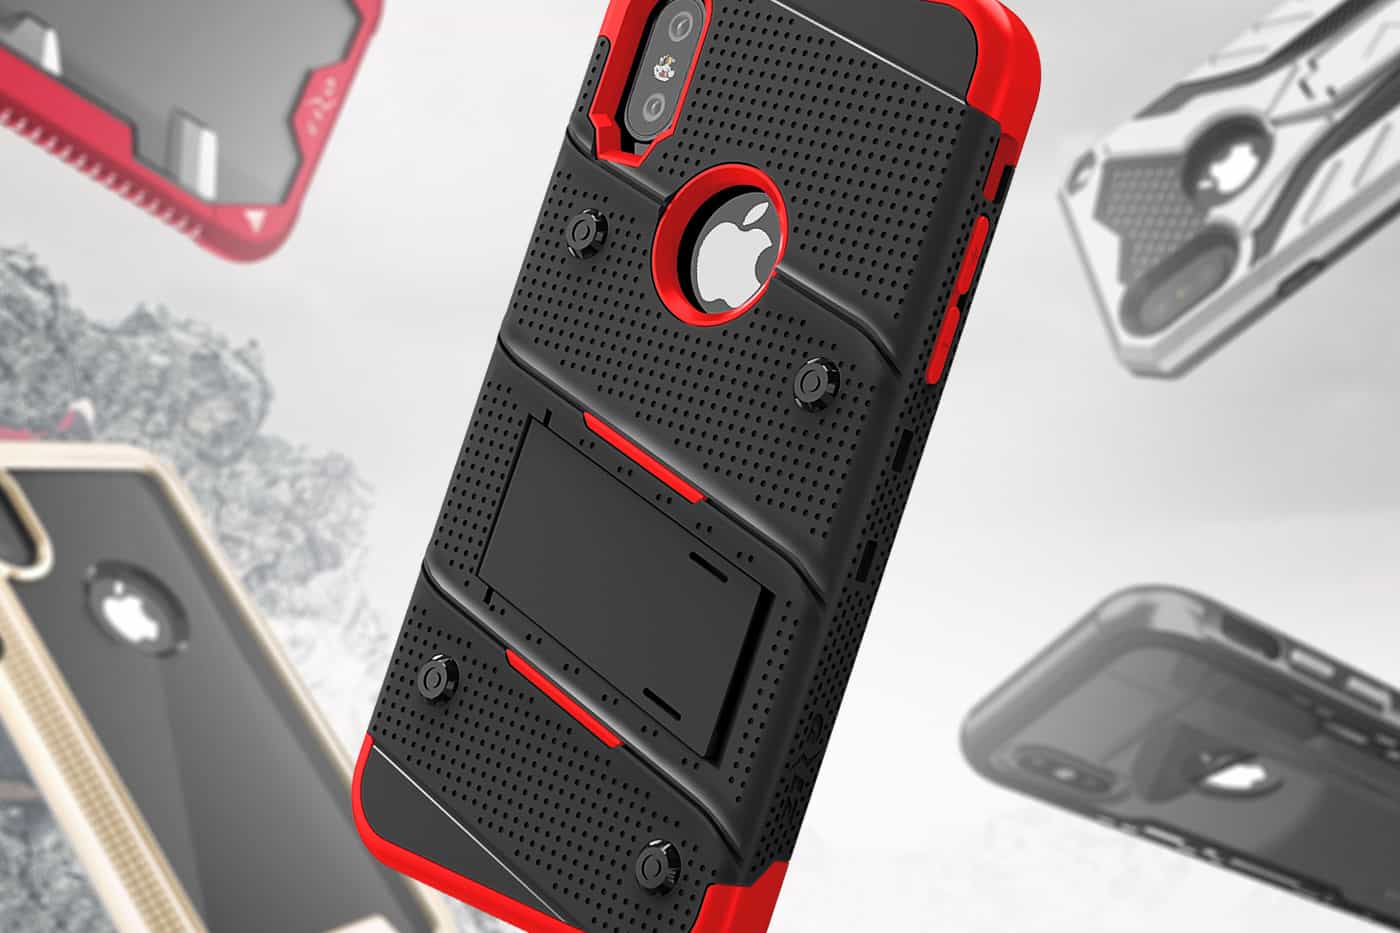 Zizo's line of futuristic cases for iPhone X are designed to military specifications of toughness.